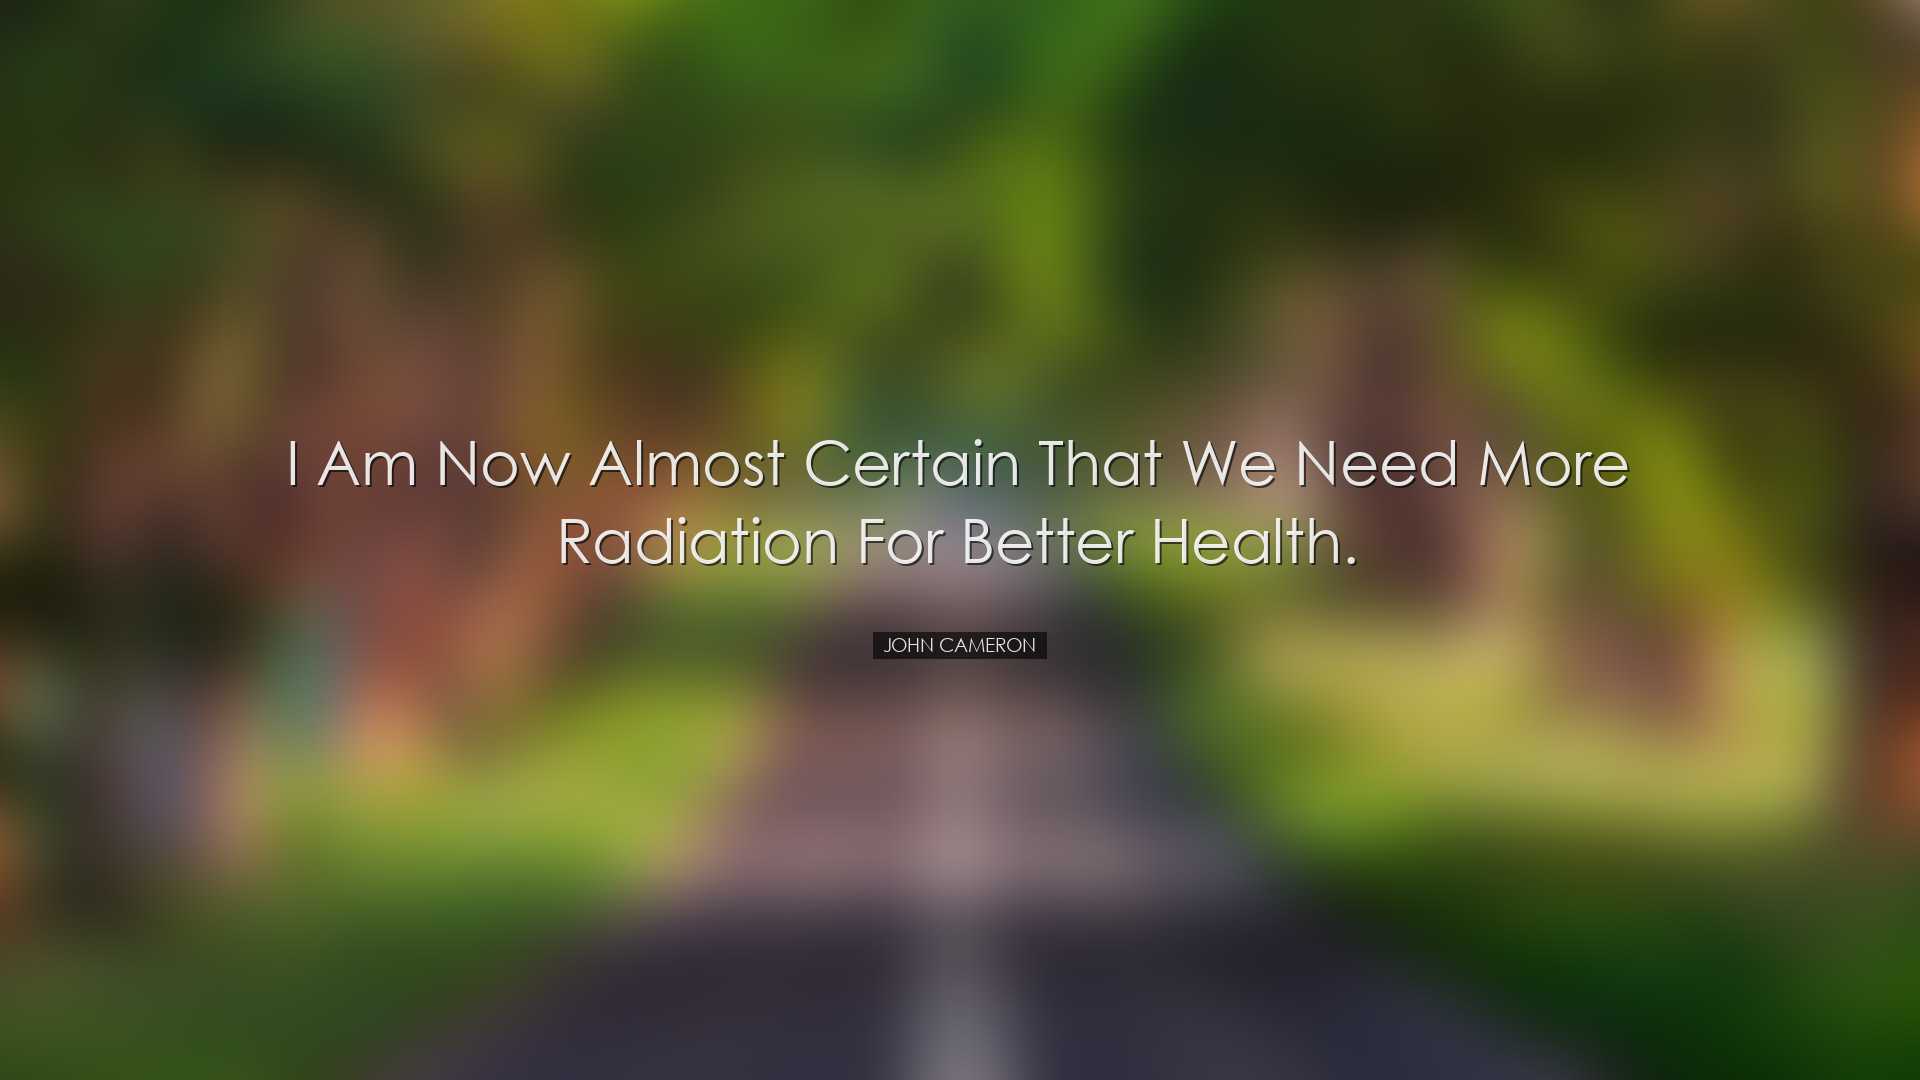 I am now almost certain that we need more radiation for better hea